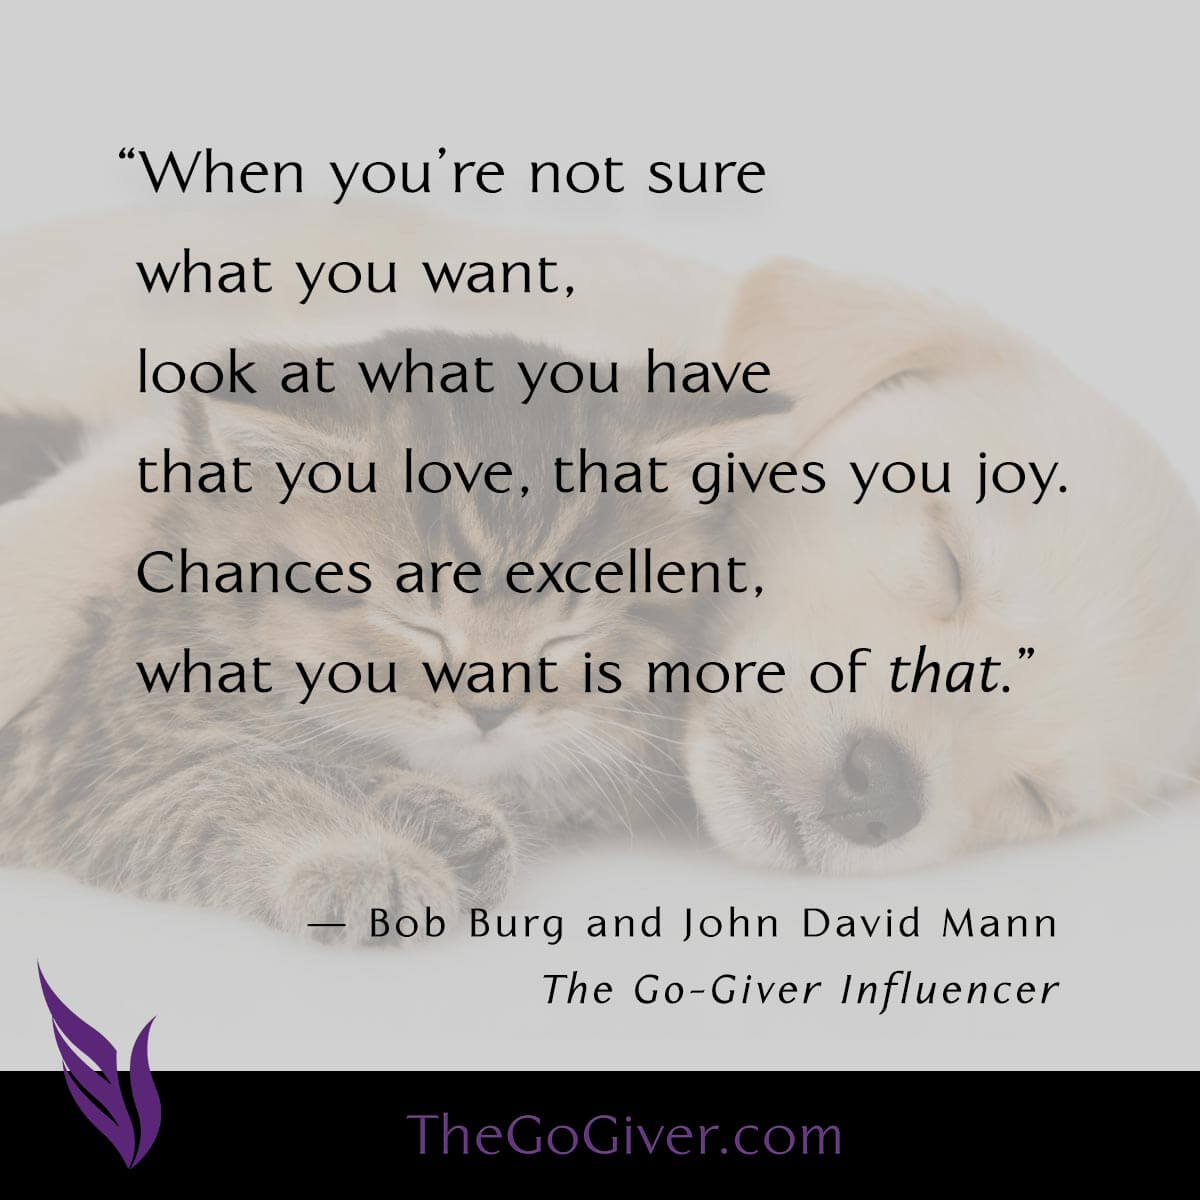 When you're not sure what you want, look at what you have that you love, that gives you joy. Chances are excellent, what you want is more of that. - The Go-Giver Influencer